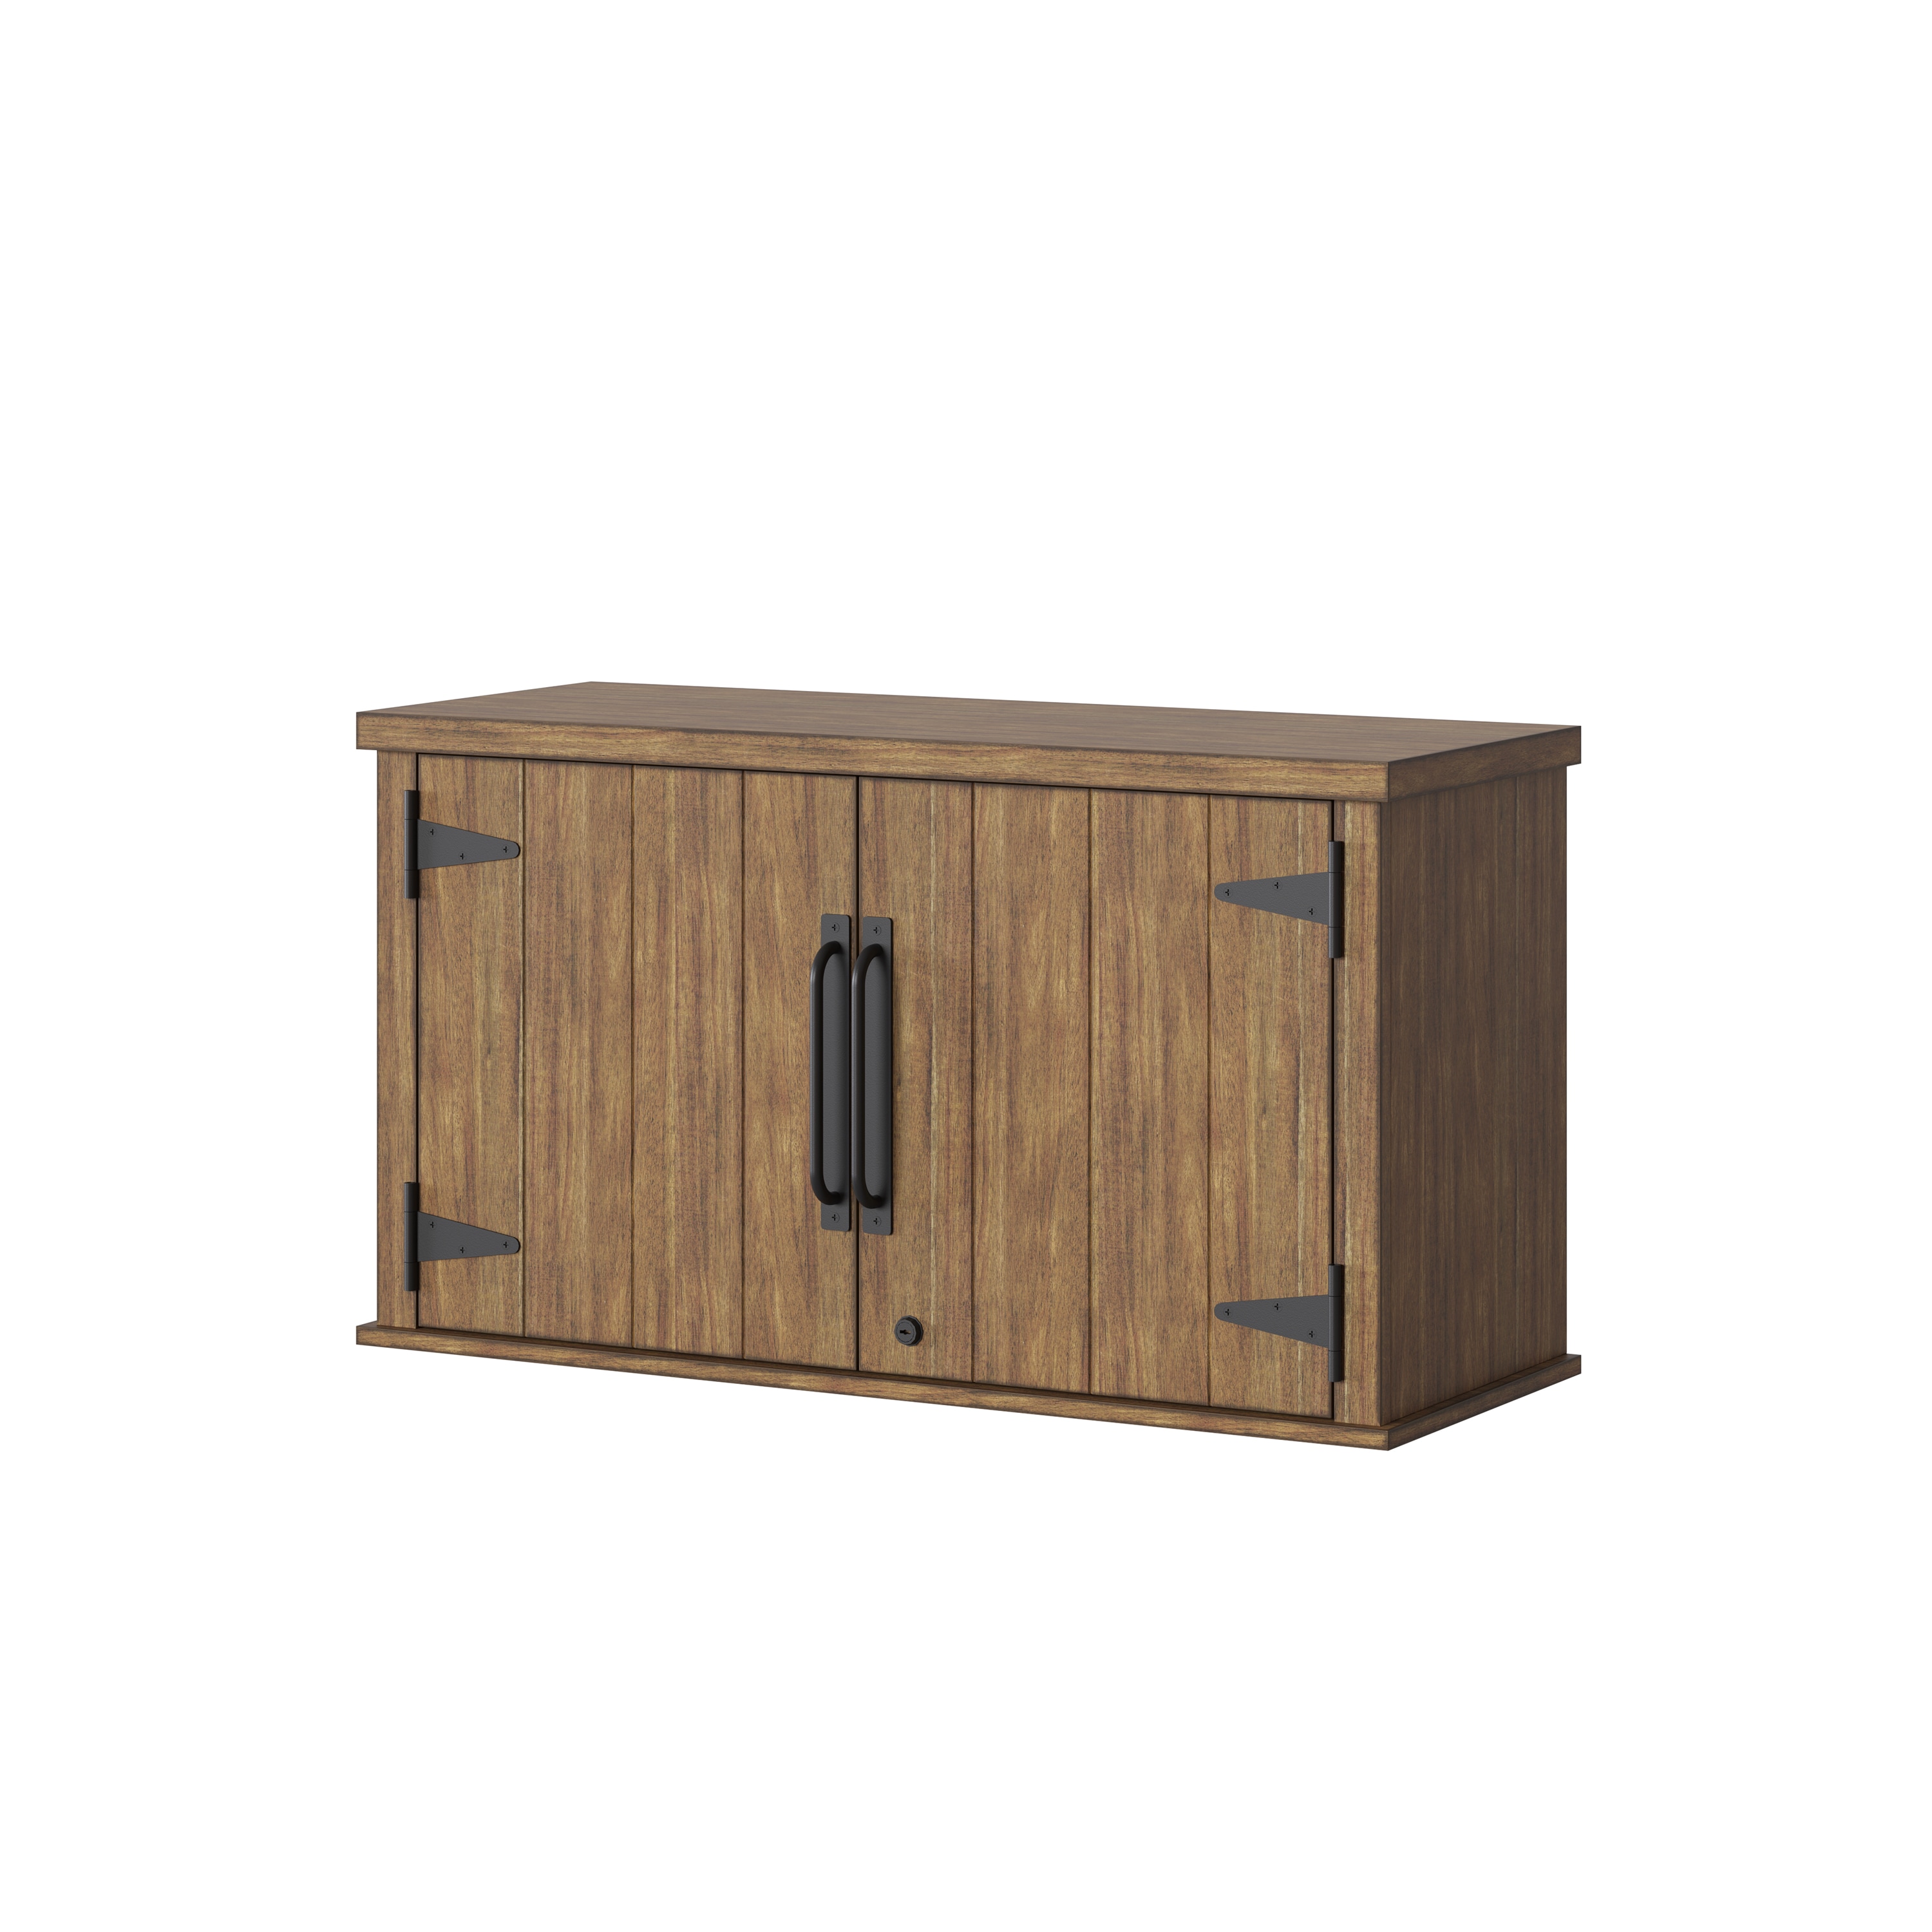 Cahill Composite Wood Freestanding or Wall-mounted Garage Cabinet in Brown (36-in W x 20-in H x 14-in D) | - Scott Living SL36WBCH-1